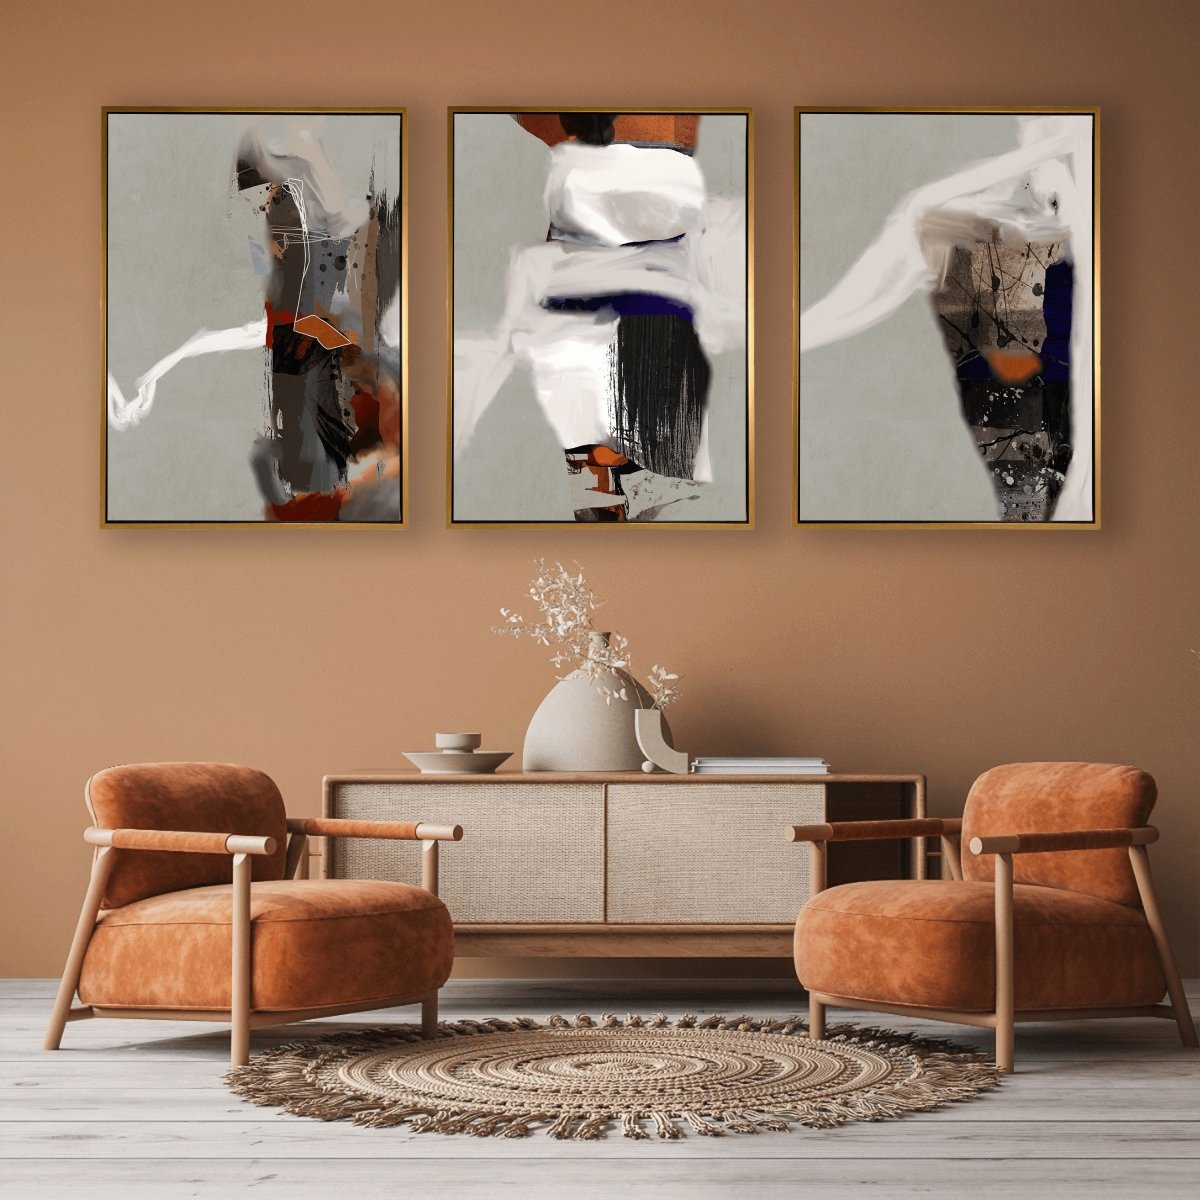 Destination framed 3 piece canvas wall art piece for sale at Vybe Interior